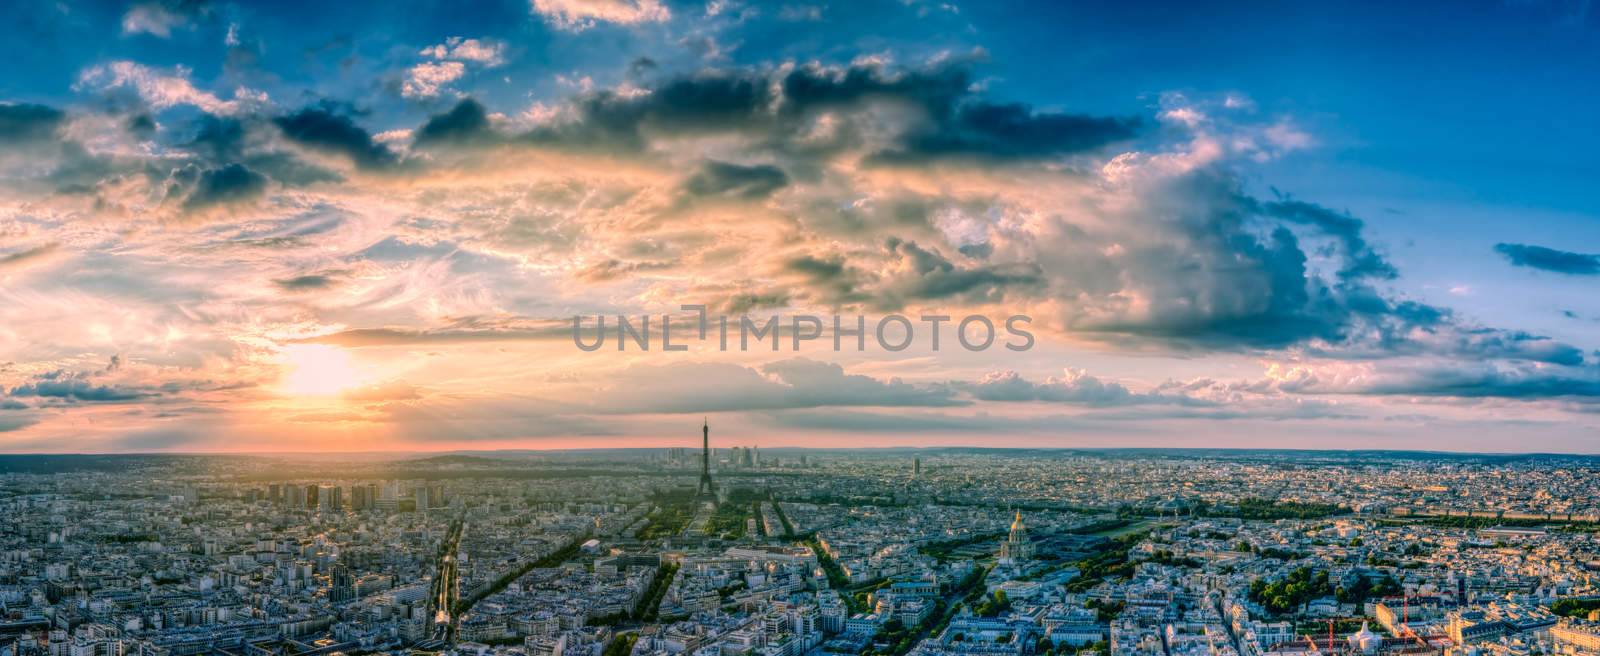 Cityscape of Paris by Harvepino